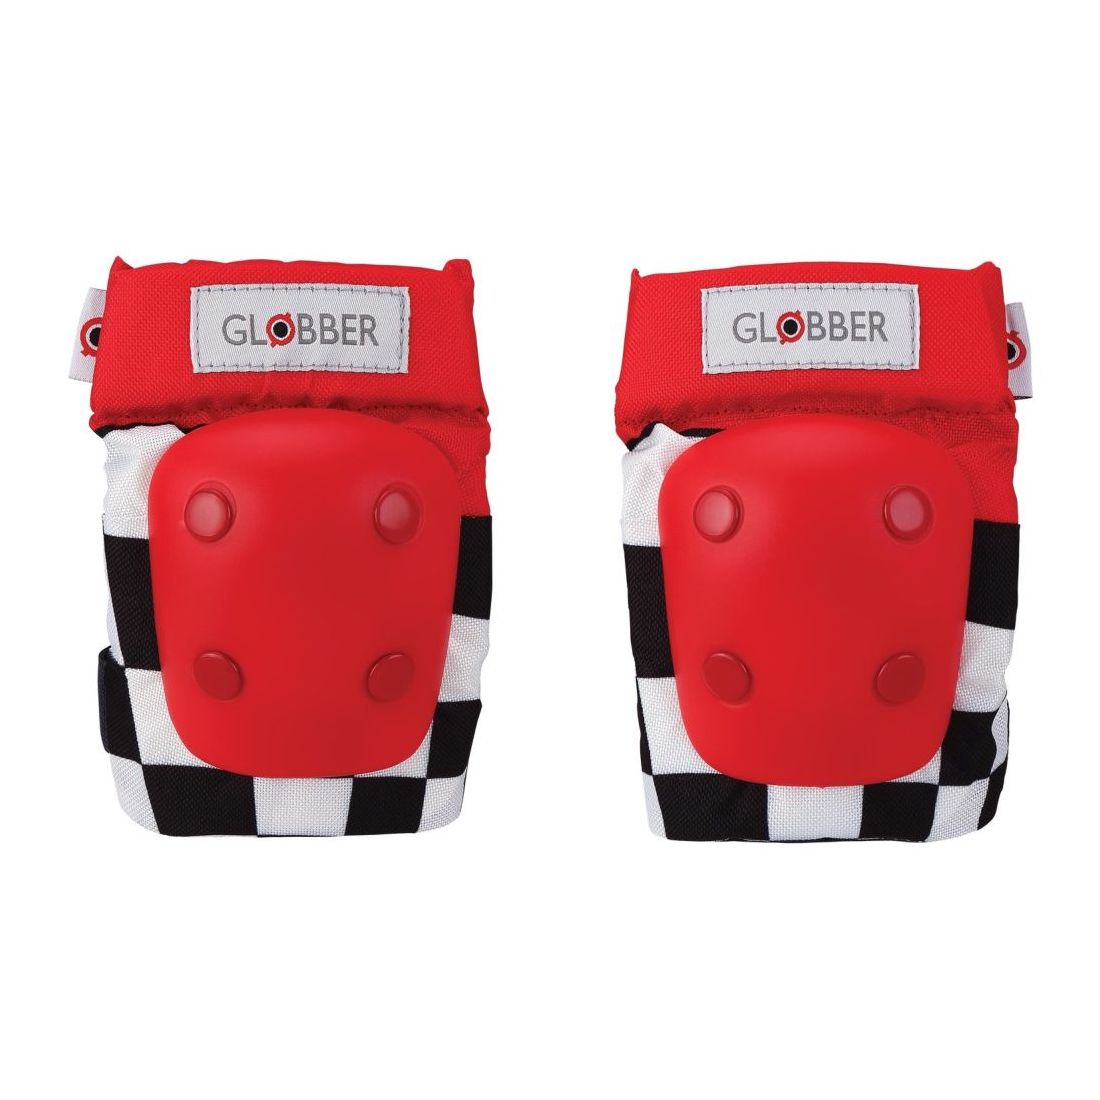 Globber Toddler Pads Racing Protective Gear